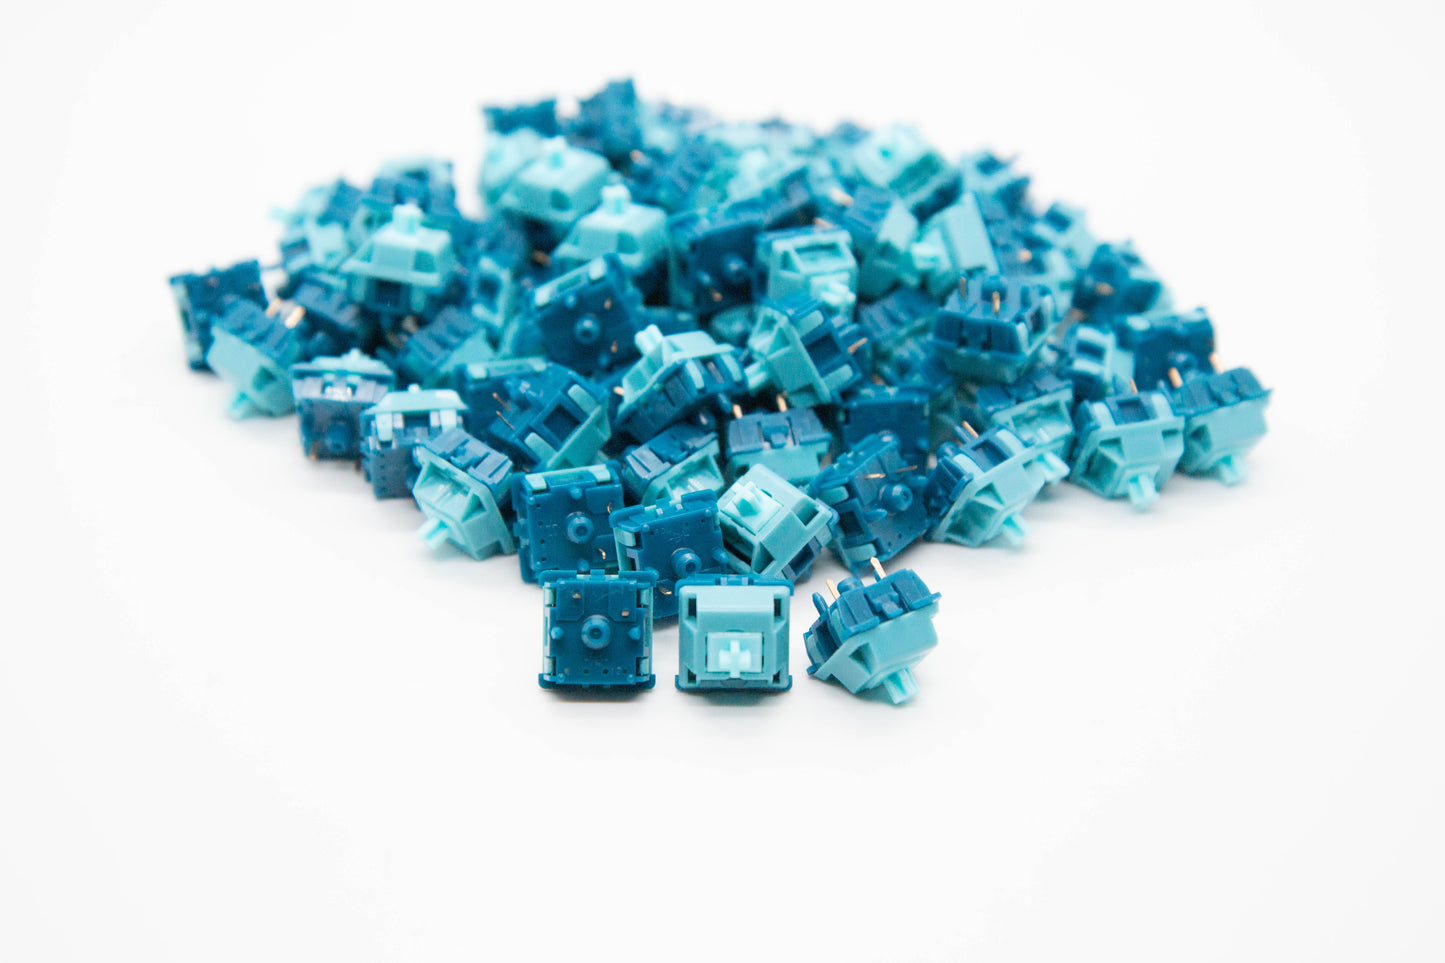 Close-up shot of a pile of Poseidon mechanical keyboard switches featuring dark and light blue housing and light blue stems